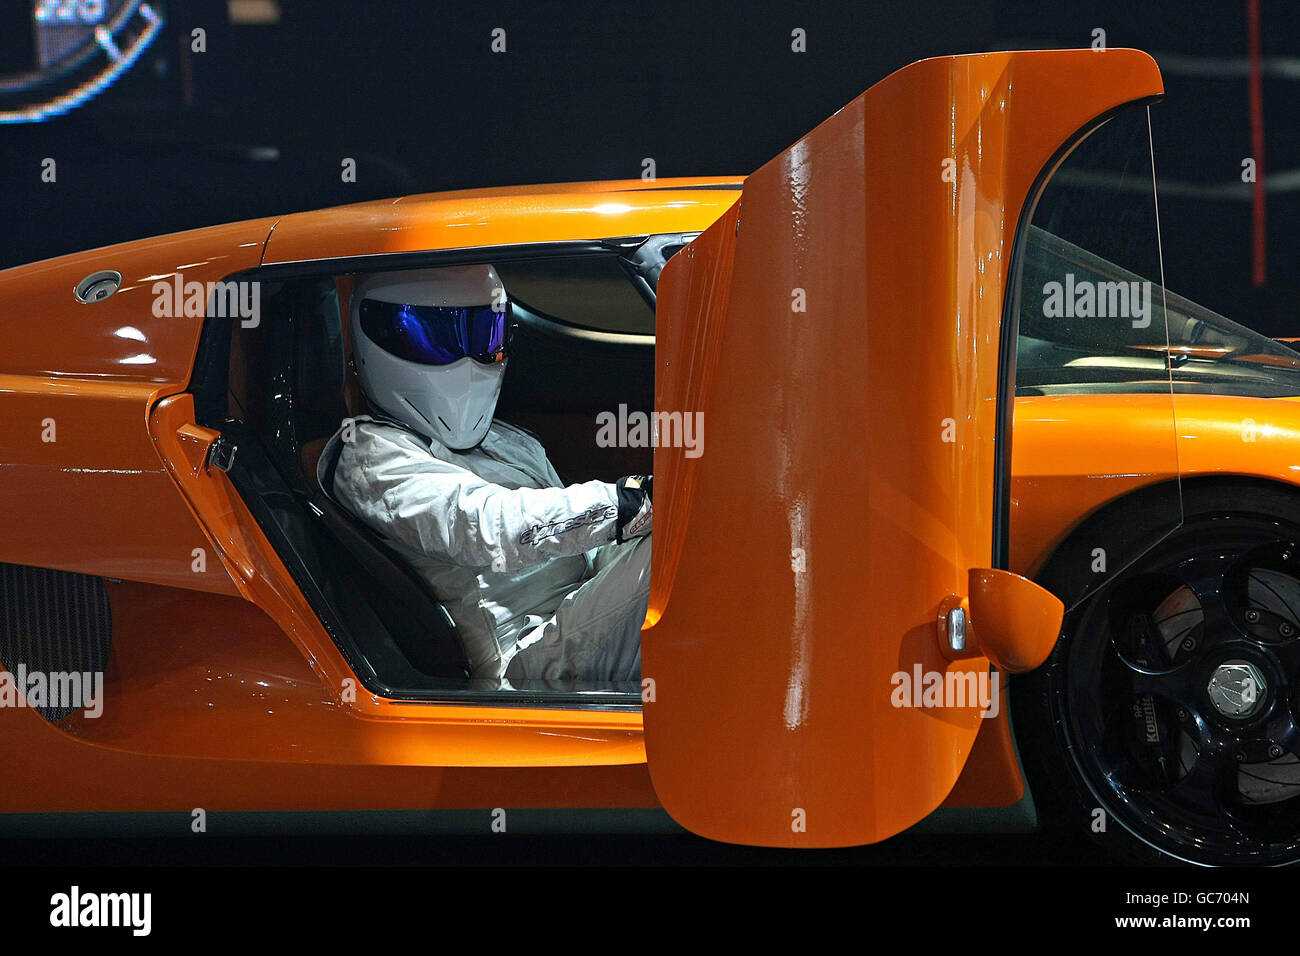 Racing driver 'The Stig' from BBC television programme Top Gear at the Top Gear Live show at the RDS Showgrounds, Dublin. Stock Photo